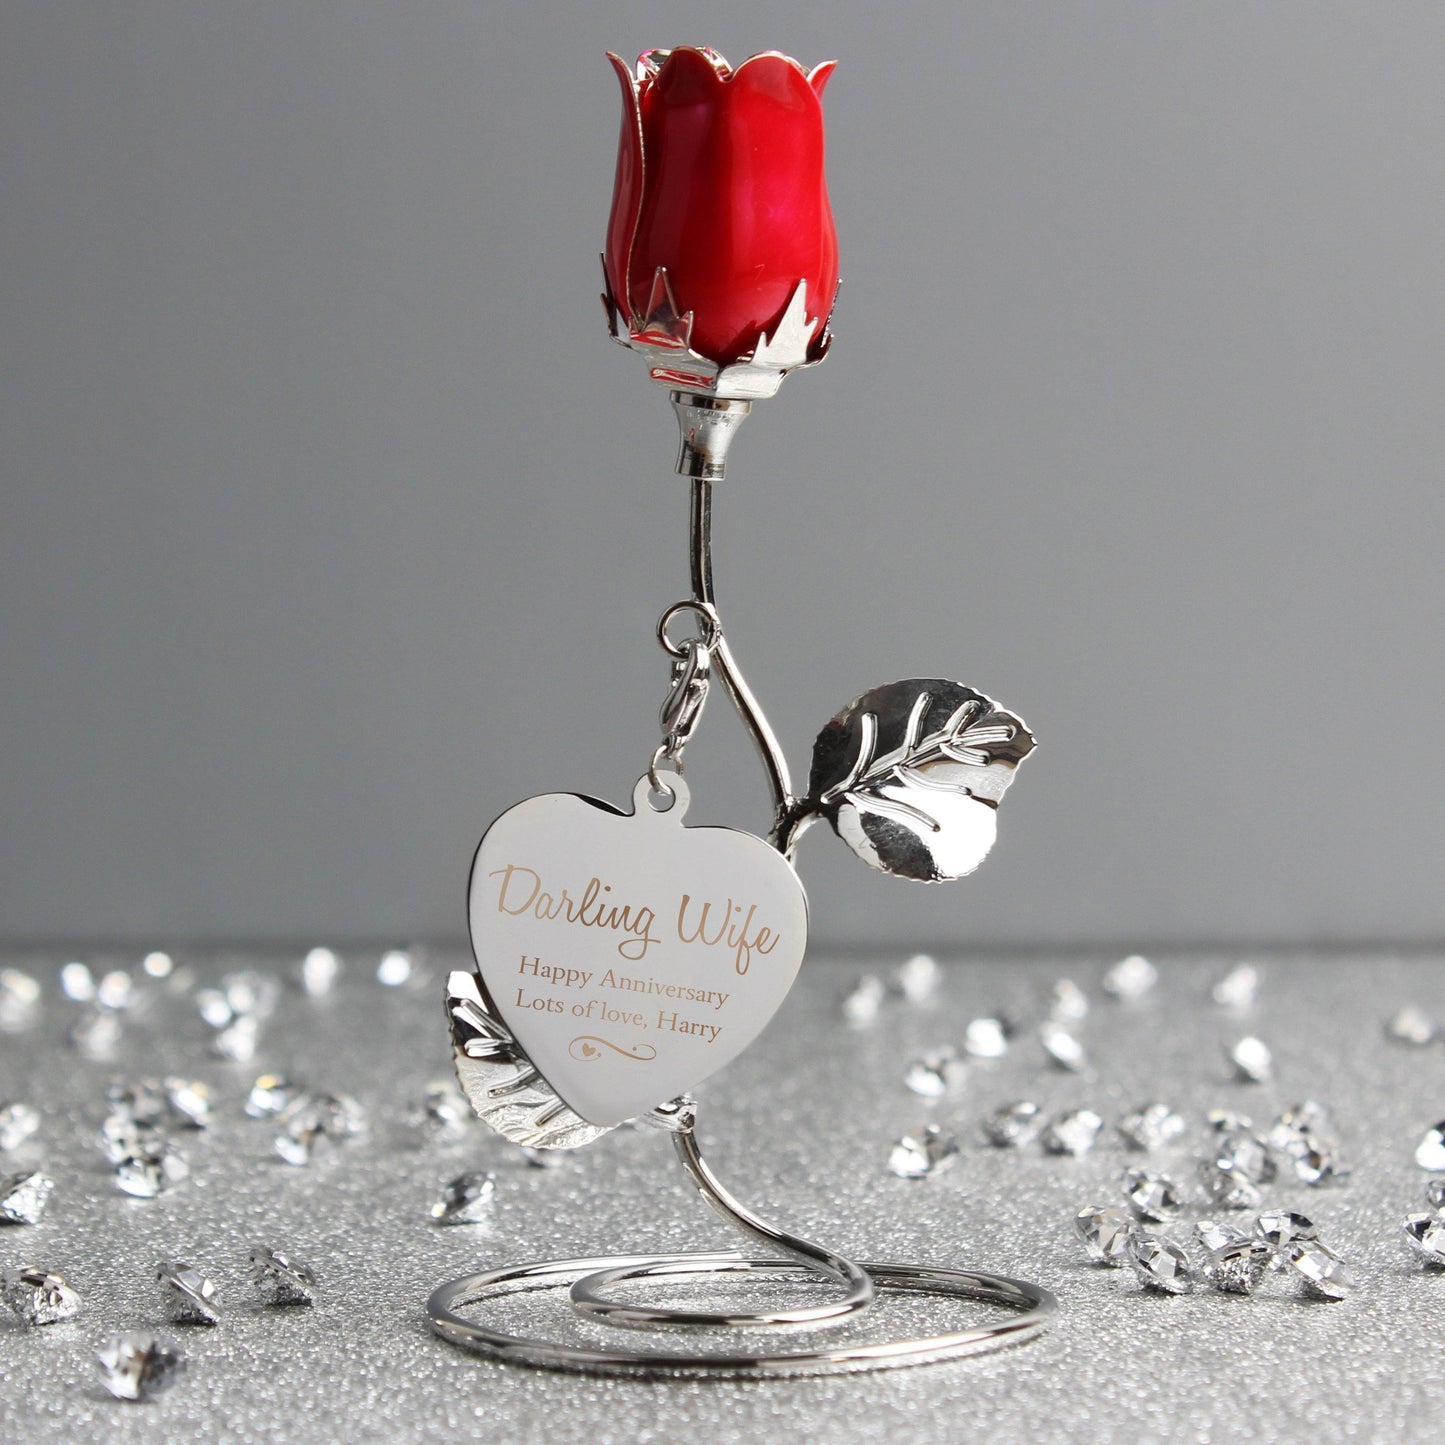 Personalised Silver Swirls & Hearts Red Rose Bud Ornament - Home Inspired Gifts